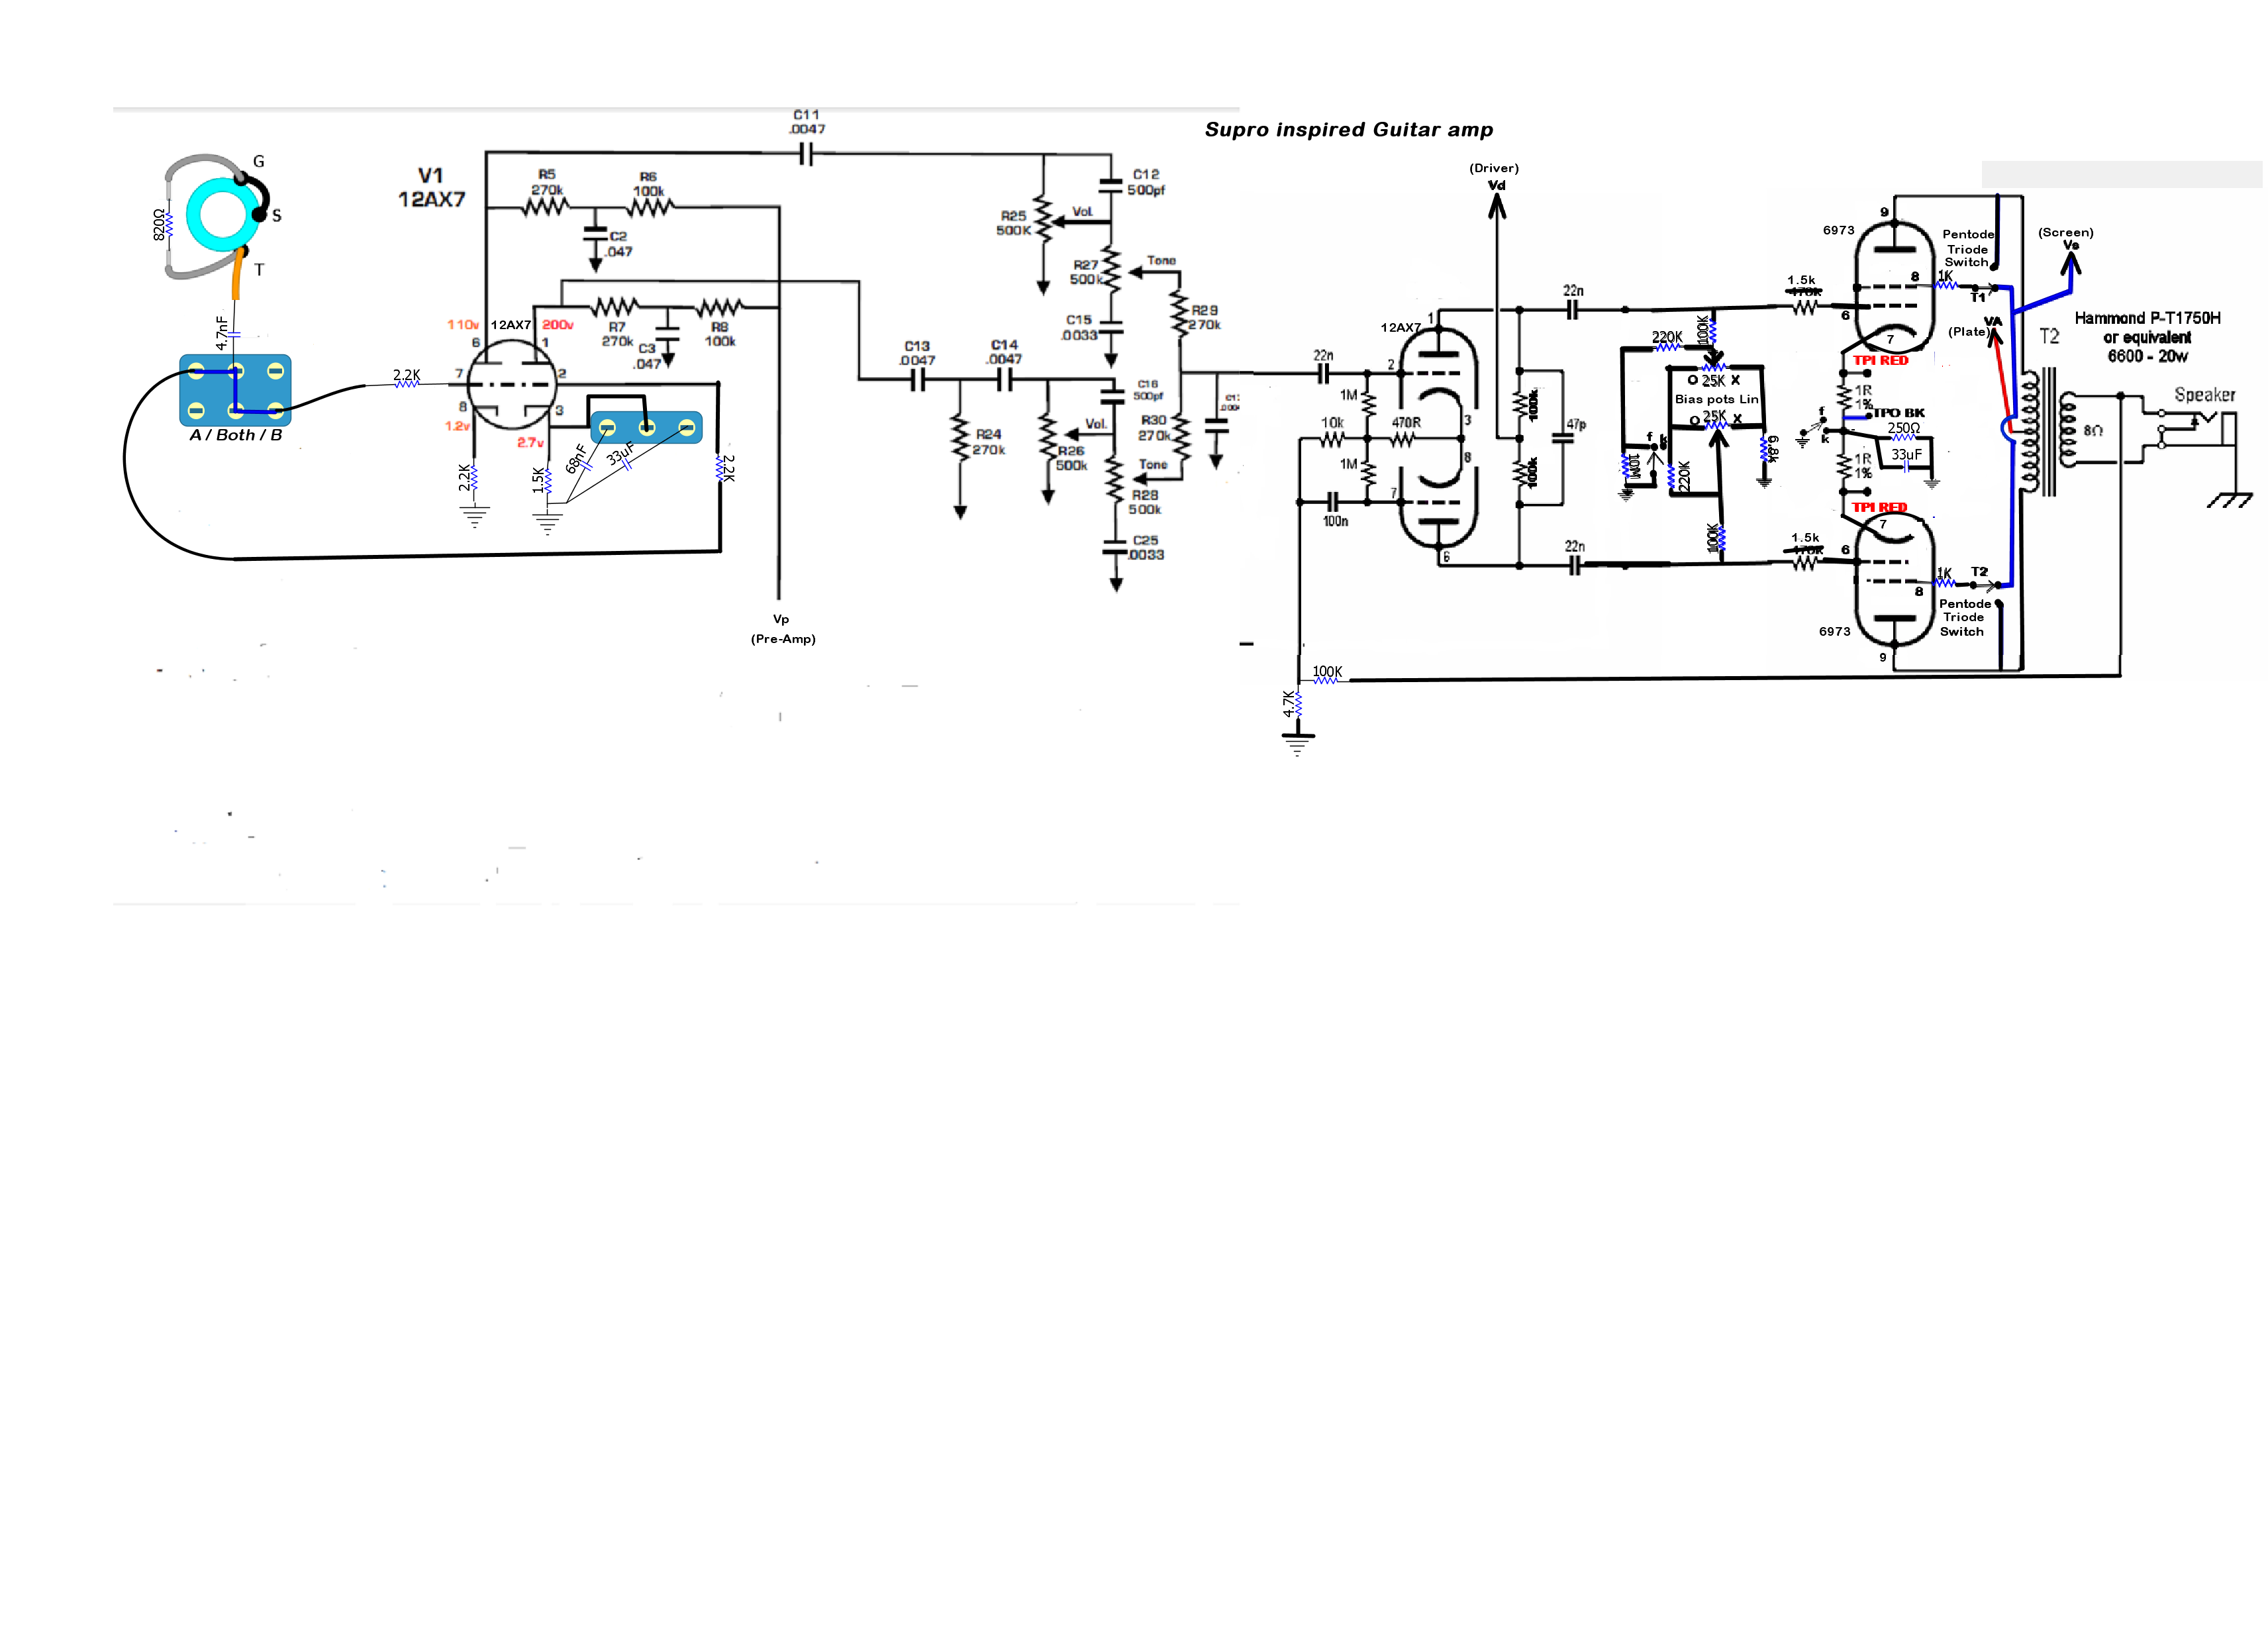 Supro Inspired Amp To Build Soon Just Finished 1st Schematic Music Electronics Forum